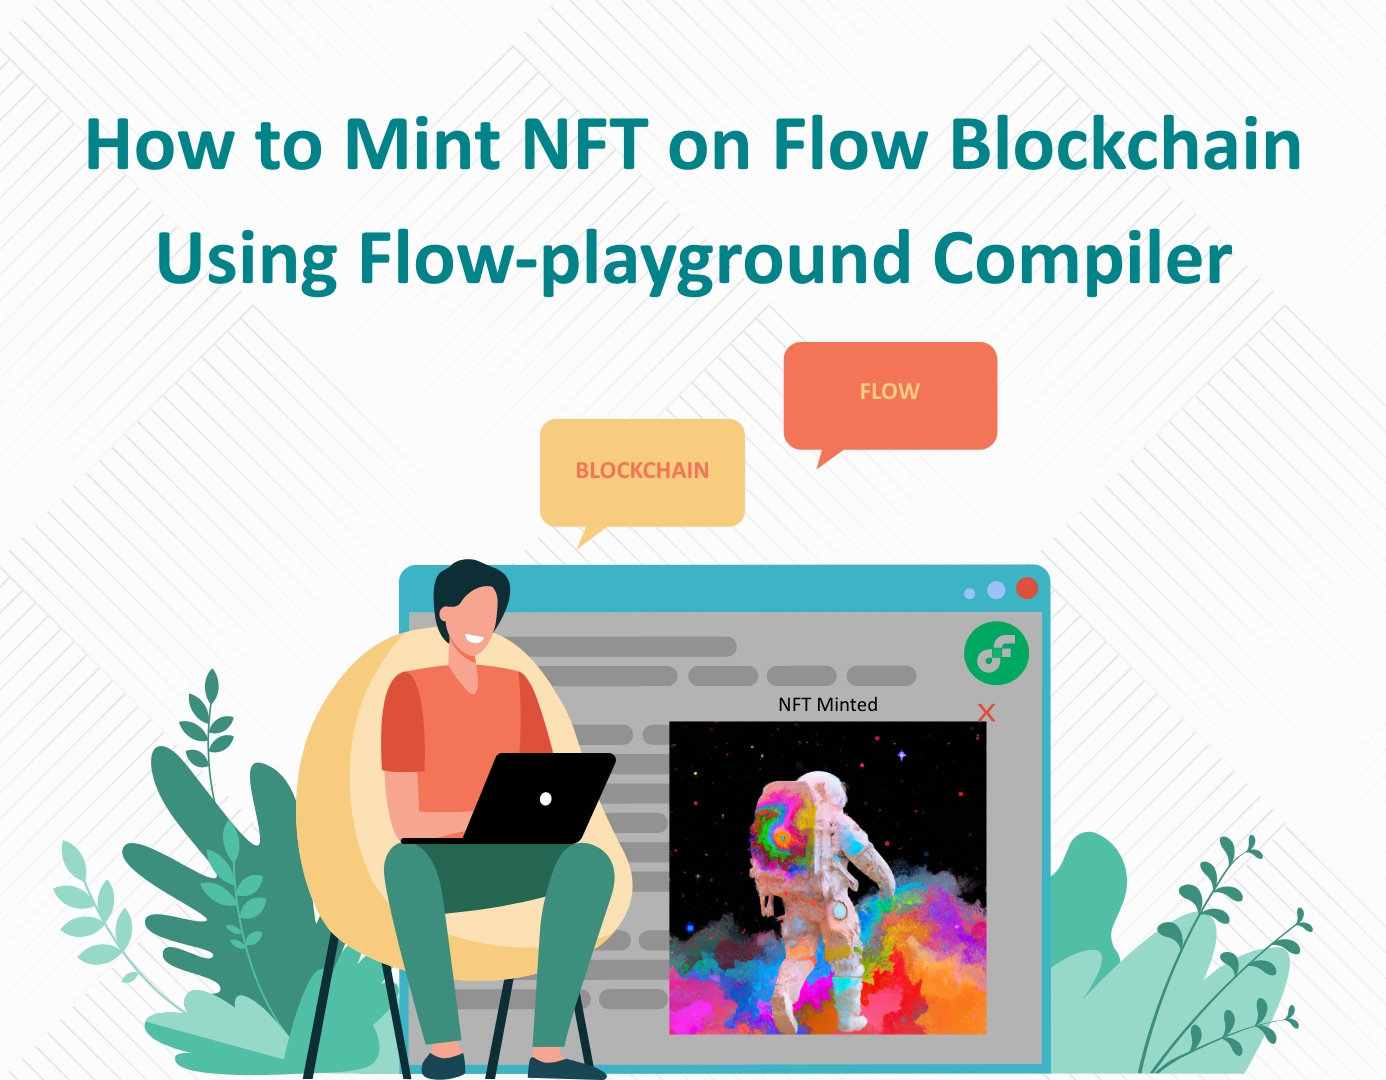 How to Mint NFT on Flow Blockchain Using Flow-playground Compiler